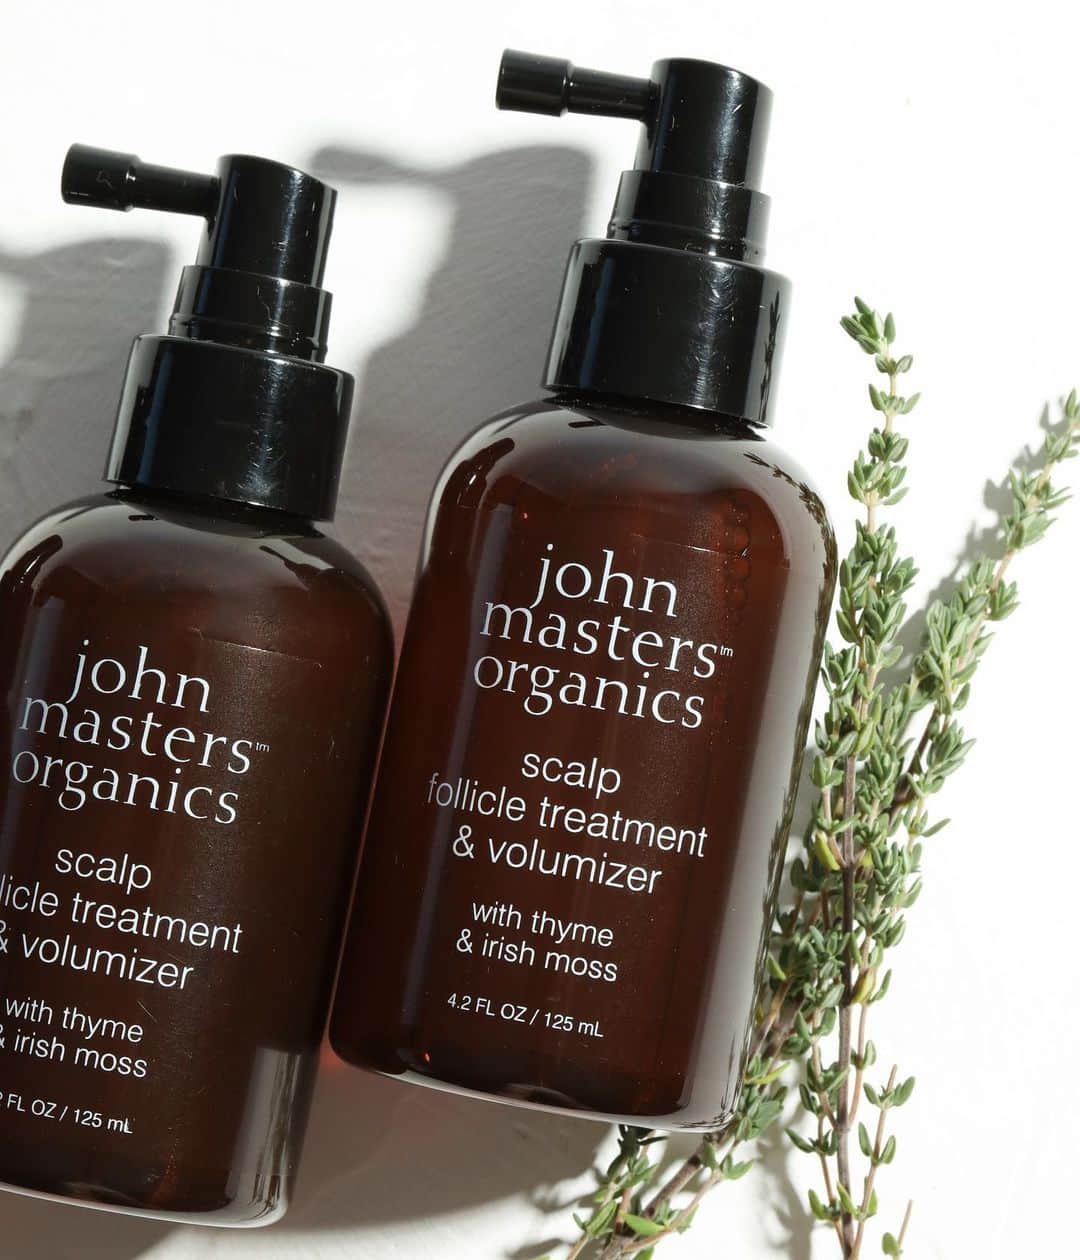 John Masters Organicsのインスタグラム：「"After almost 3 months of use, it is delivering absolutely fabulous results. I have about half as much hair in the drain after I wash my hour now. And I have been struggling with overall shedding and hair loss since my early 30s! Definitely recommend." - Kimberly S.」